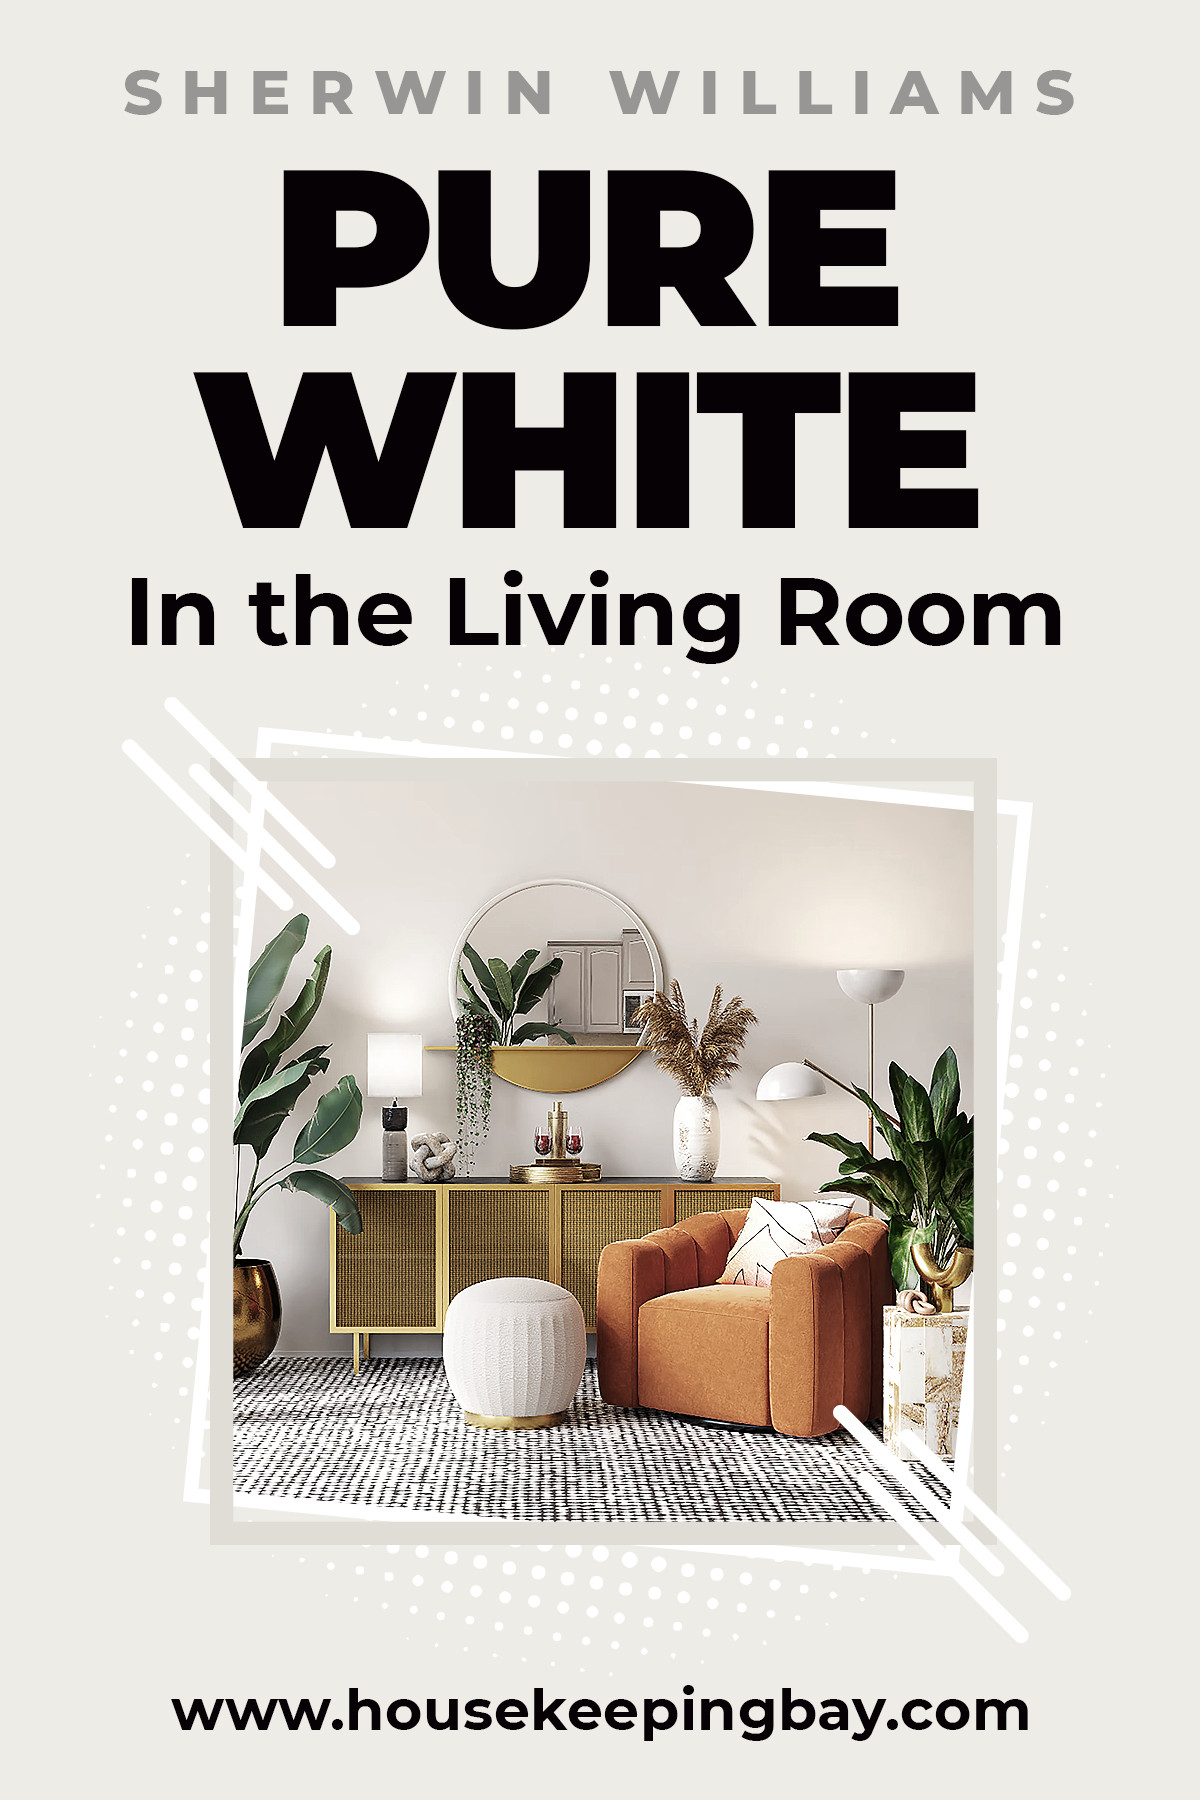 Pure White in the Living Room